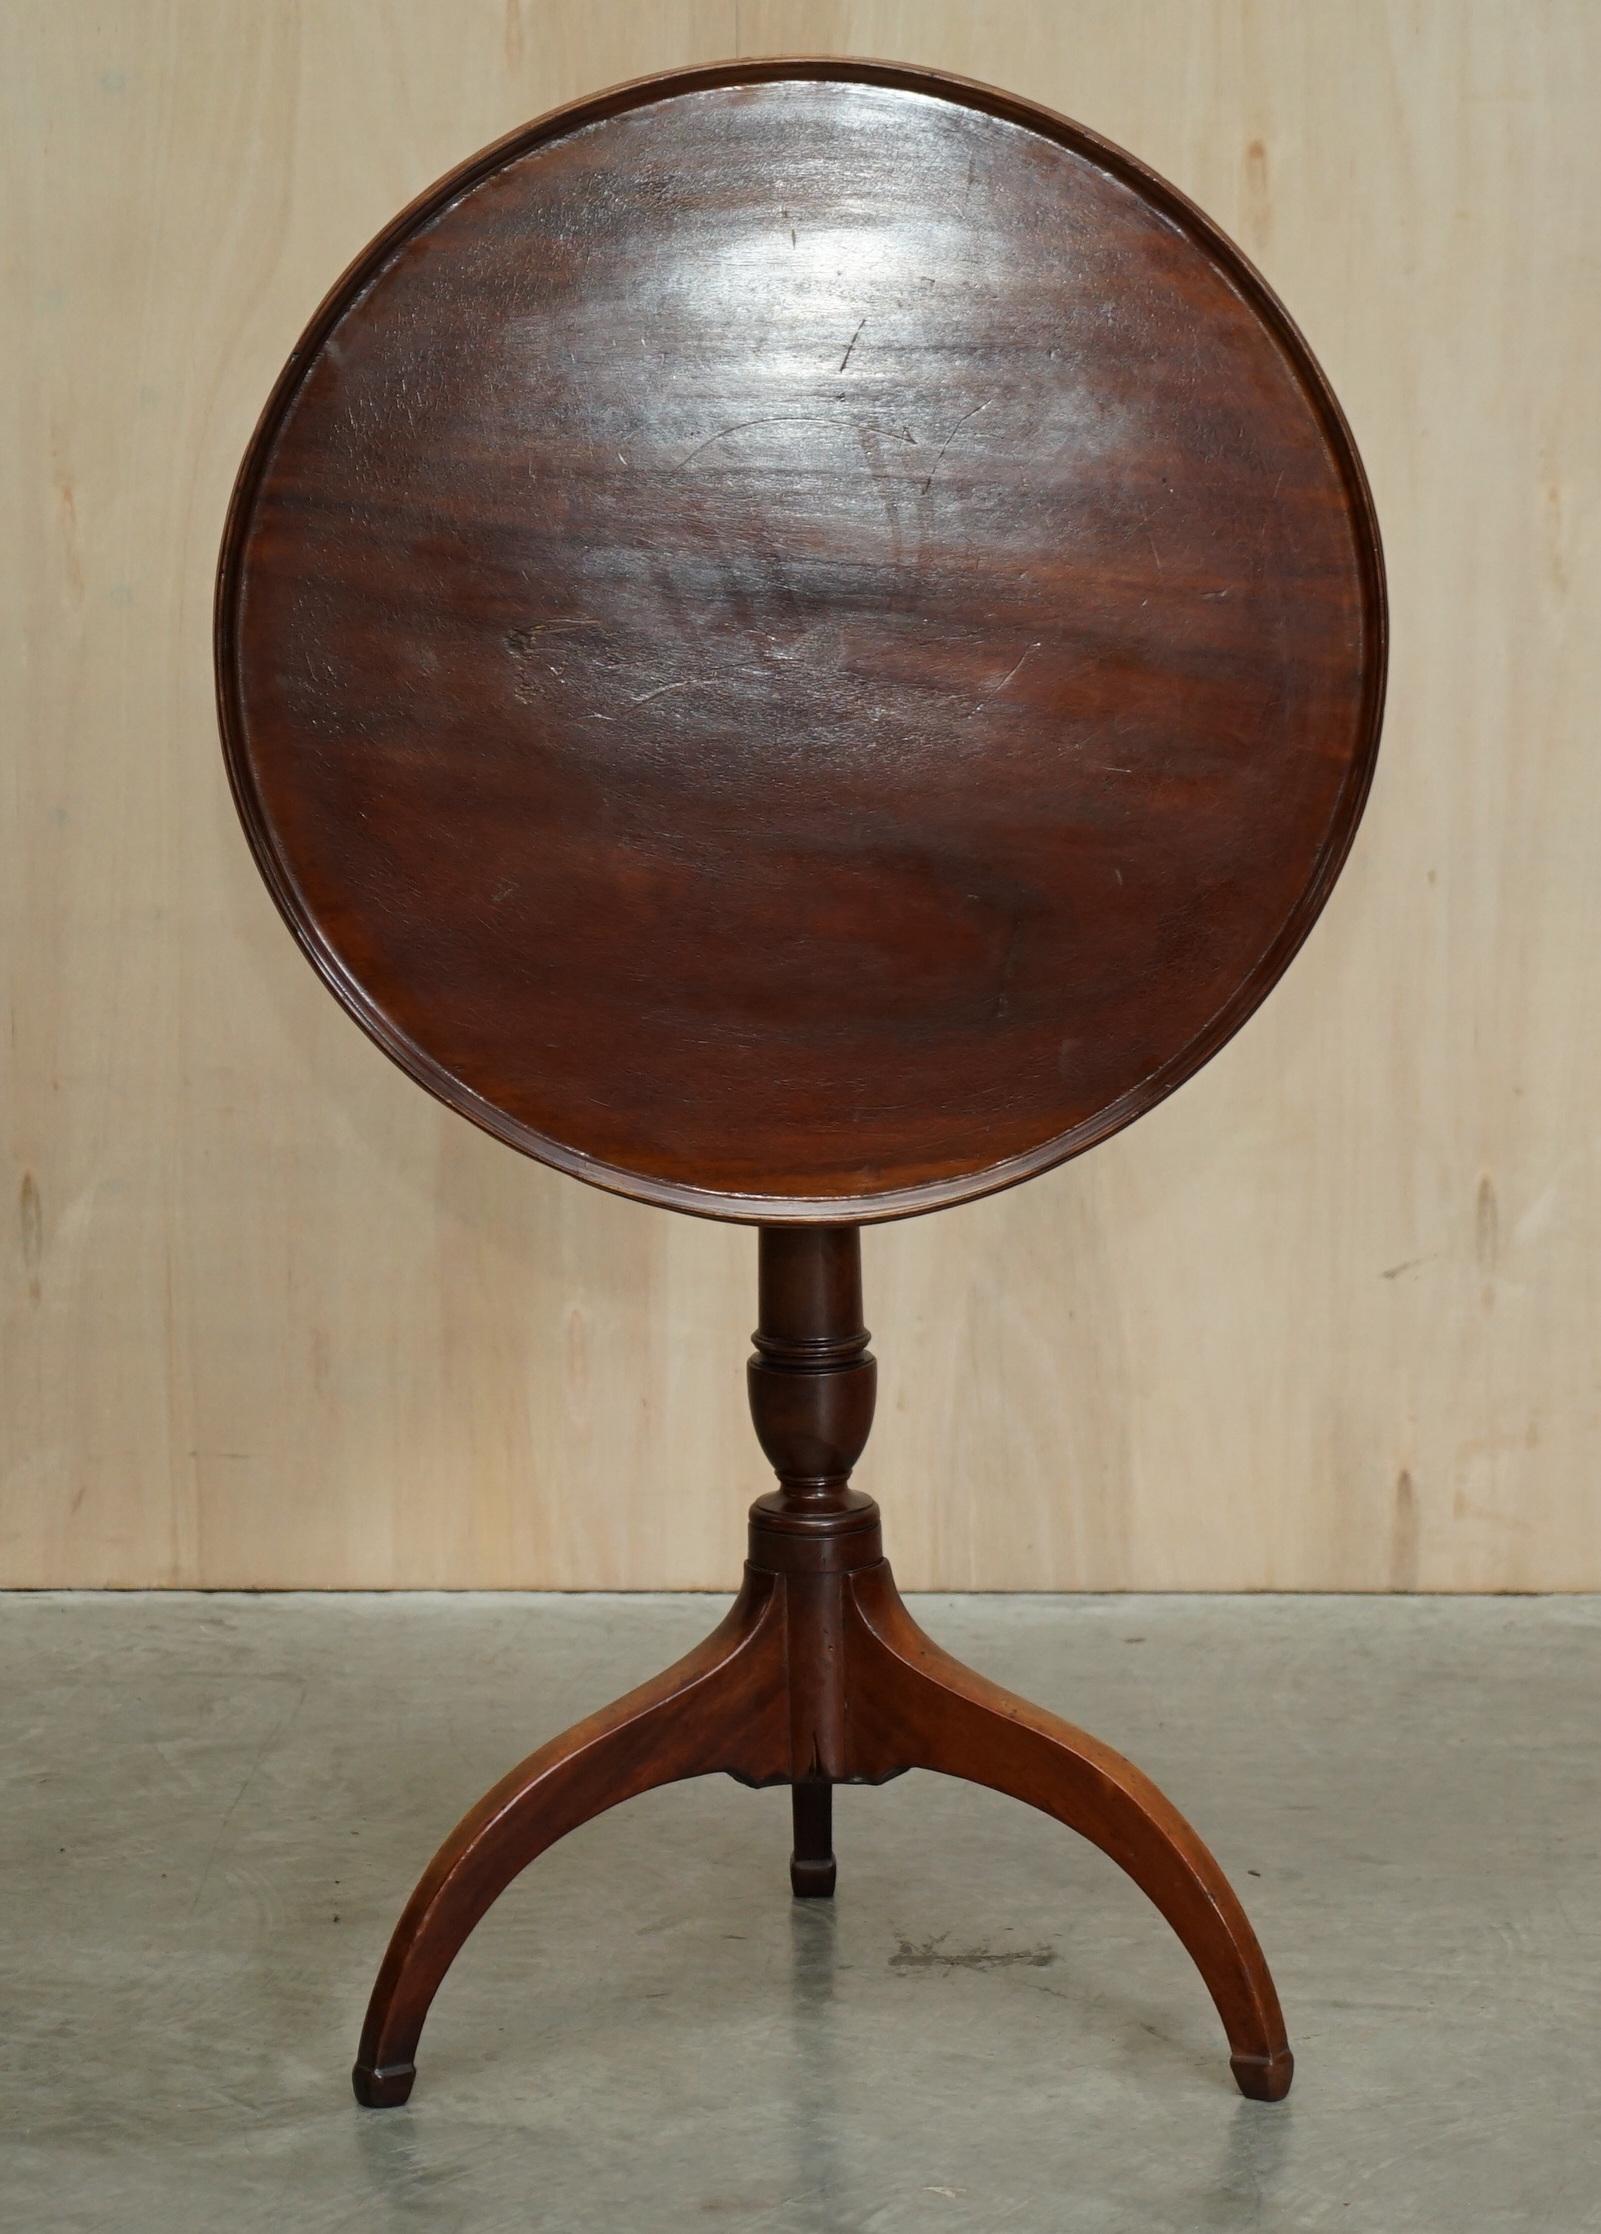 We are delighted to offer for sale this lovely circa 1780 Georgian Mahogany tilt top table with fluted column base

A wonderfully decorative and super original Georgian occasional table. This piece is pure art furniture and is 100% original. The